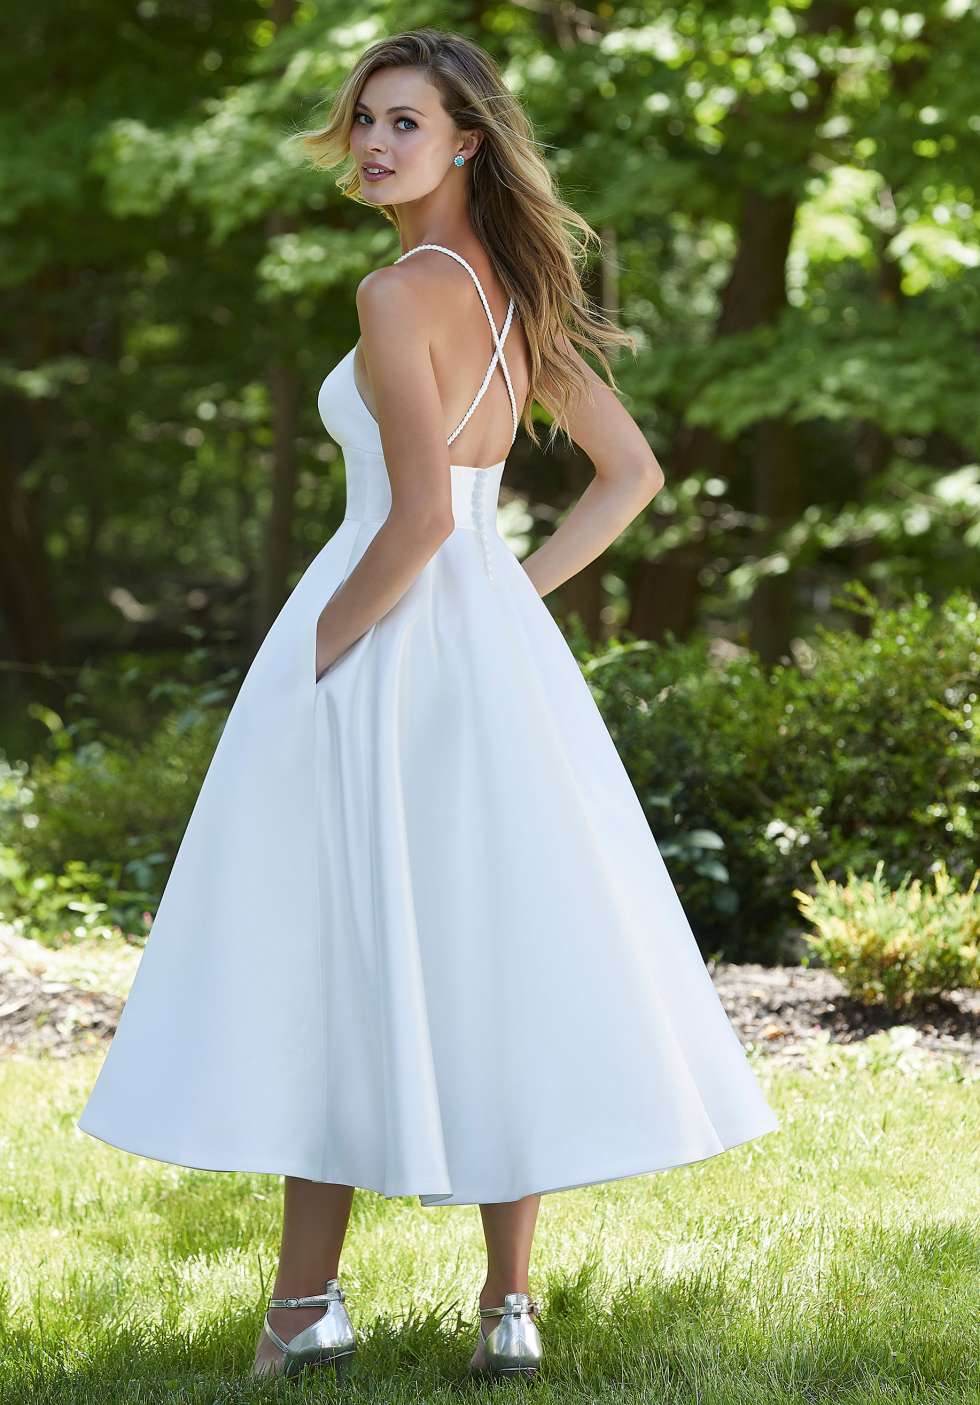 Morilee The Other White Dress Collection | Arabia Weddings